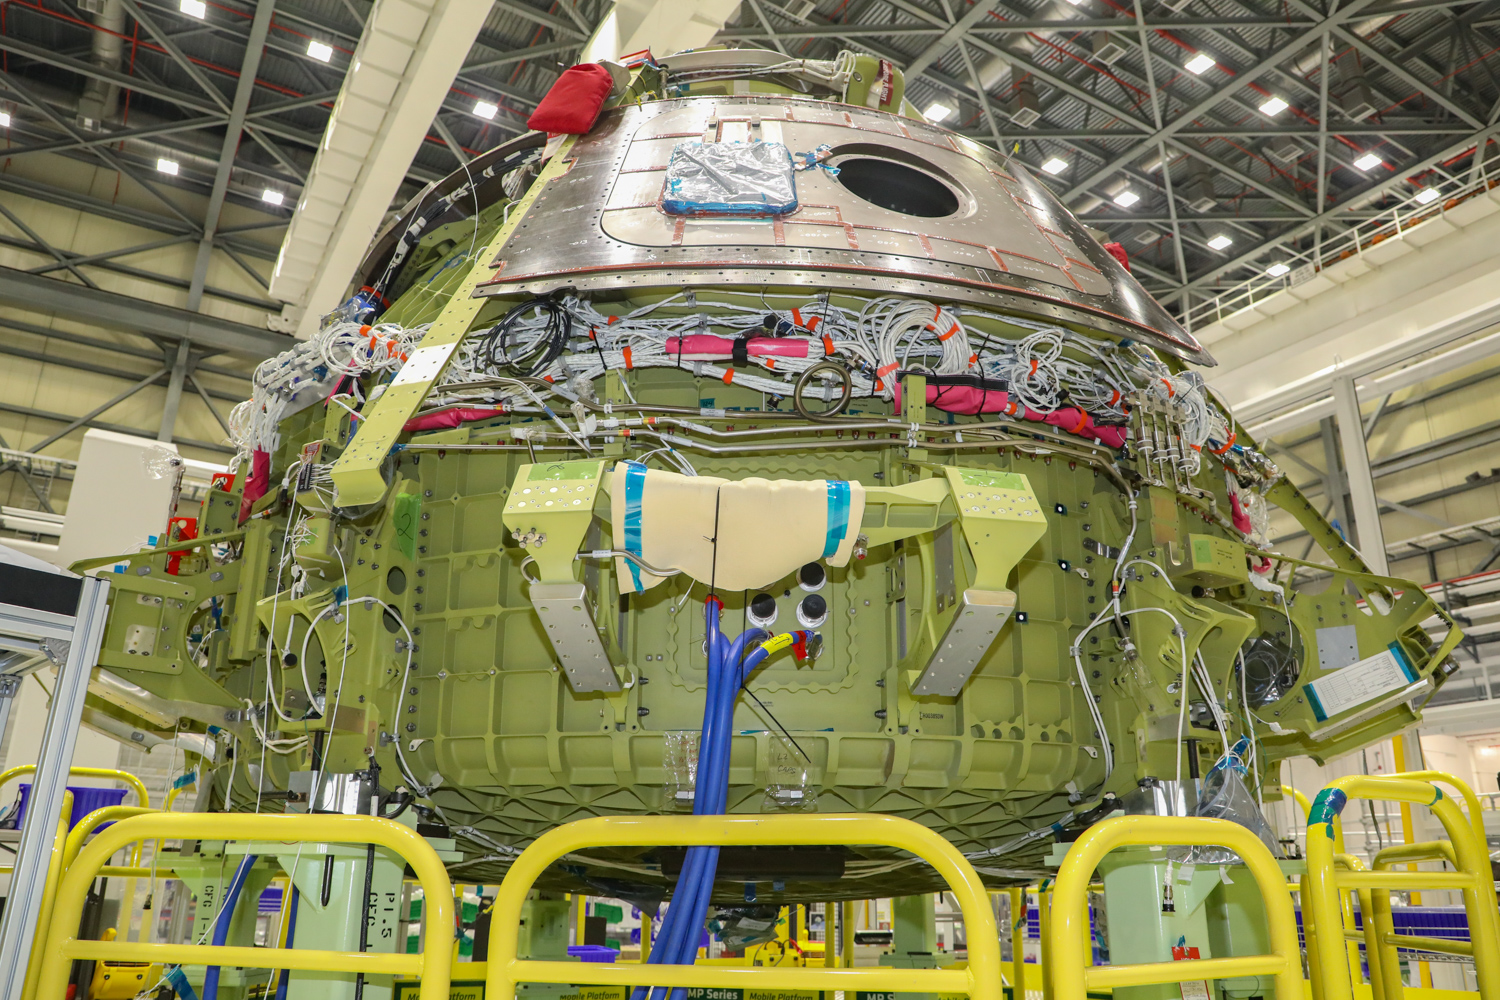 A look at the Starliner that will soon fly the uncrewed Orbital Flight Test.